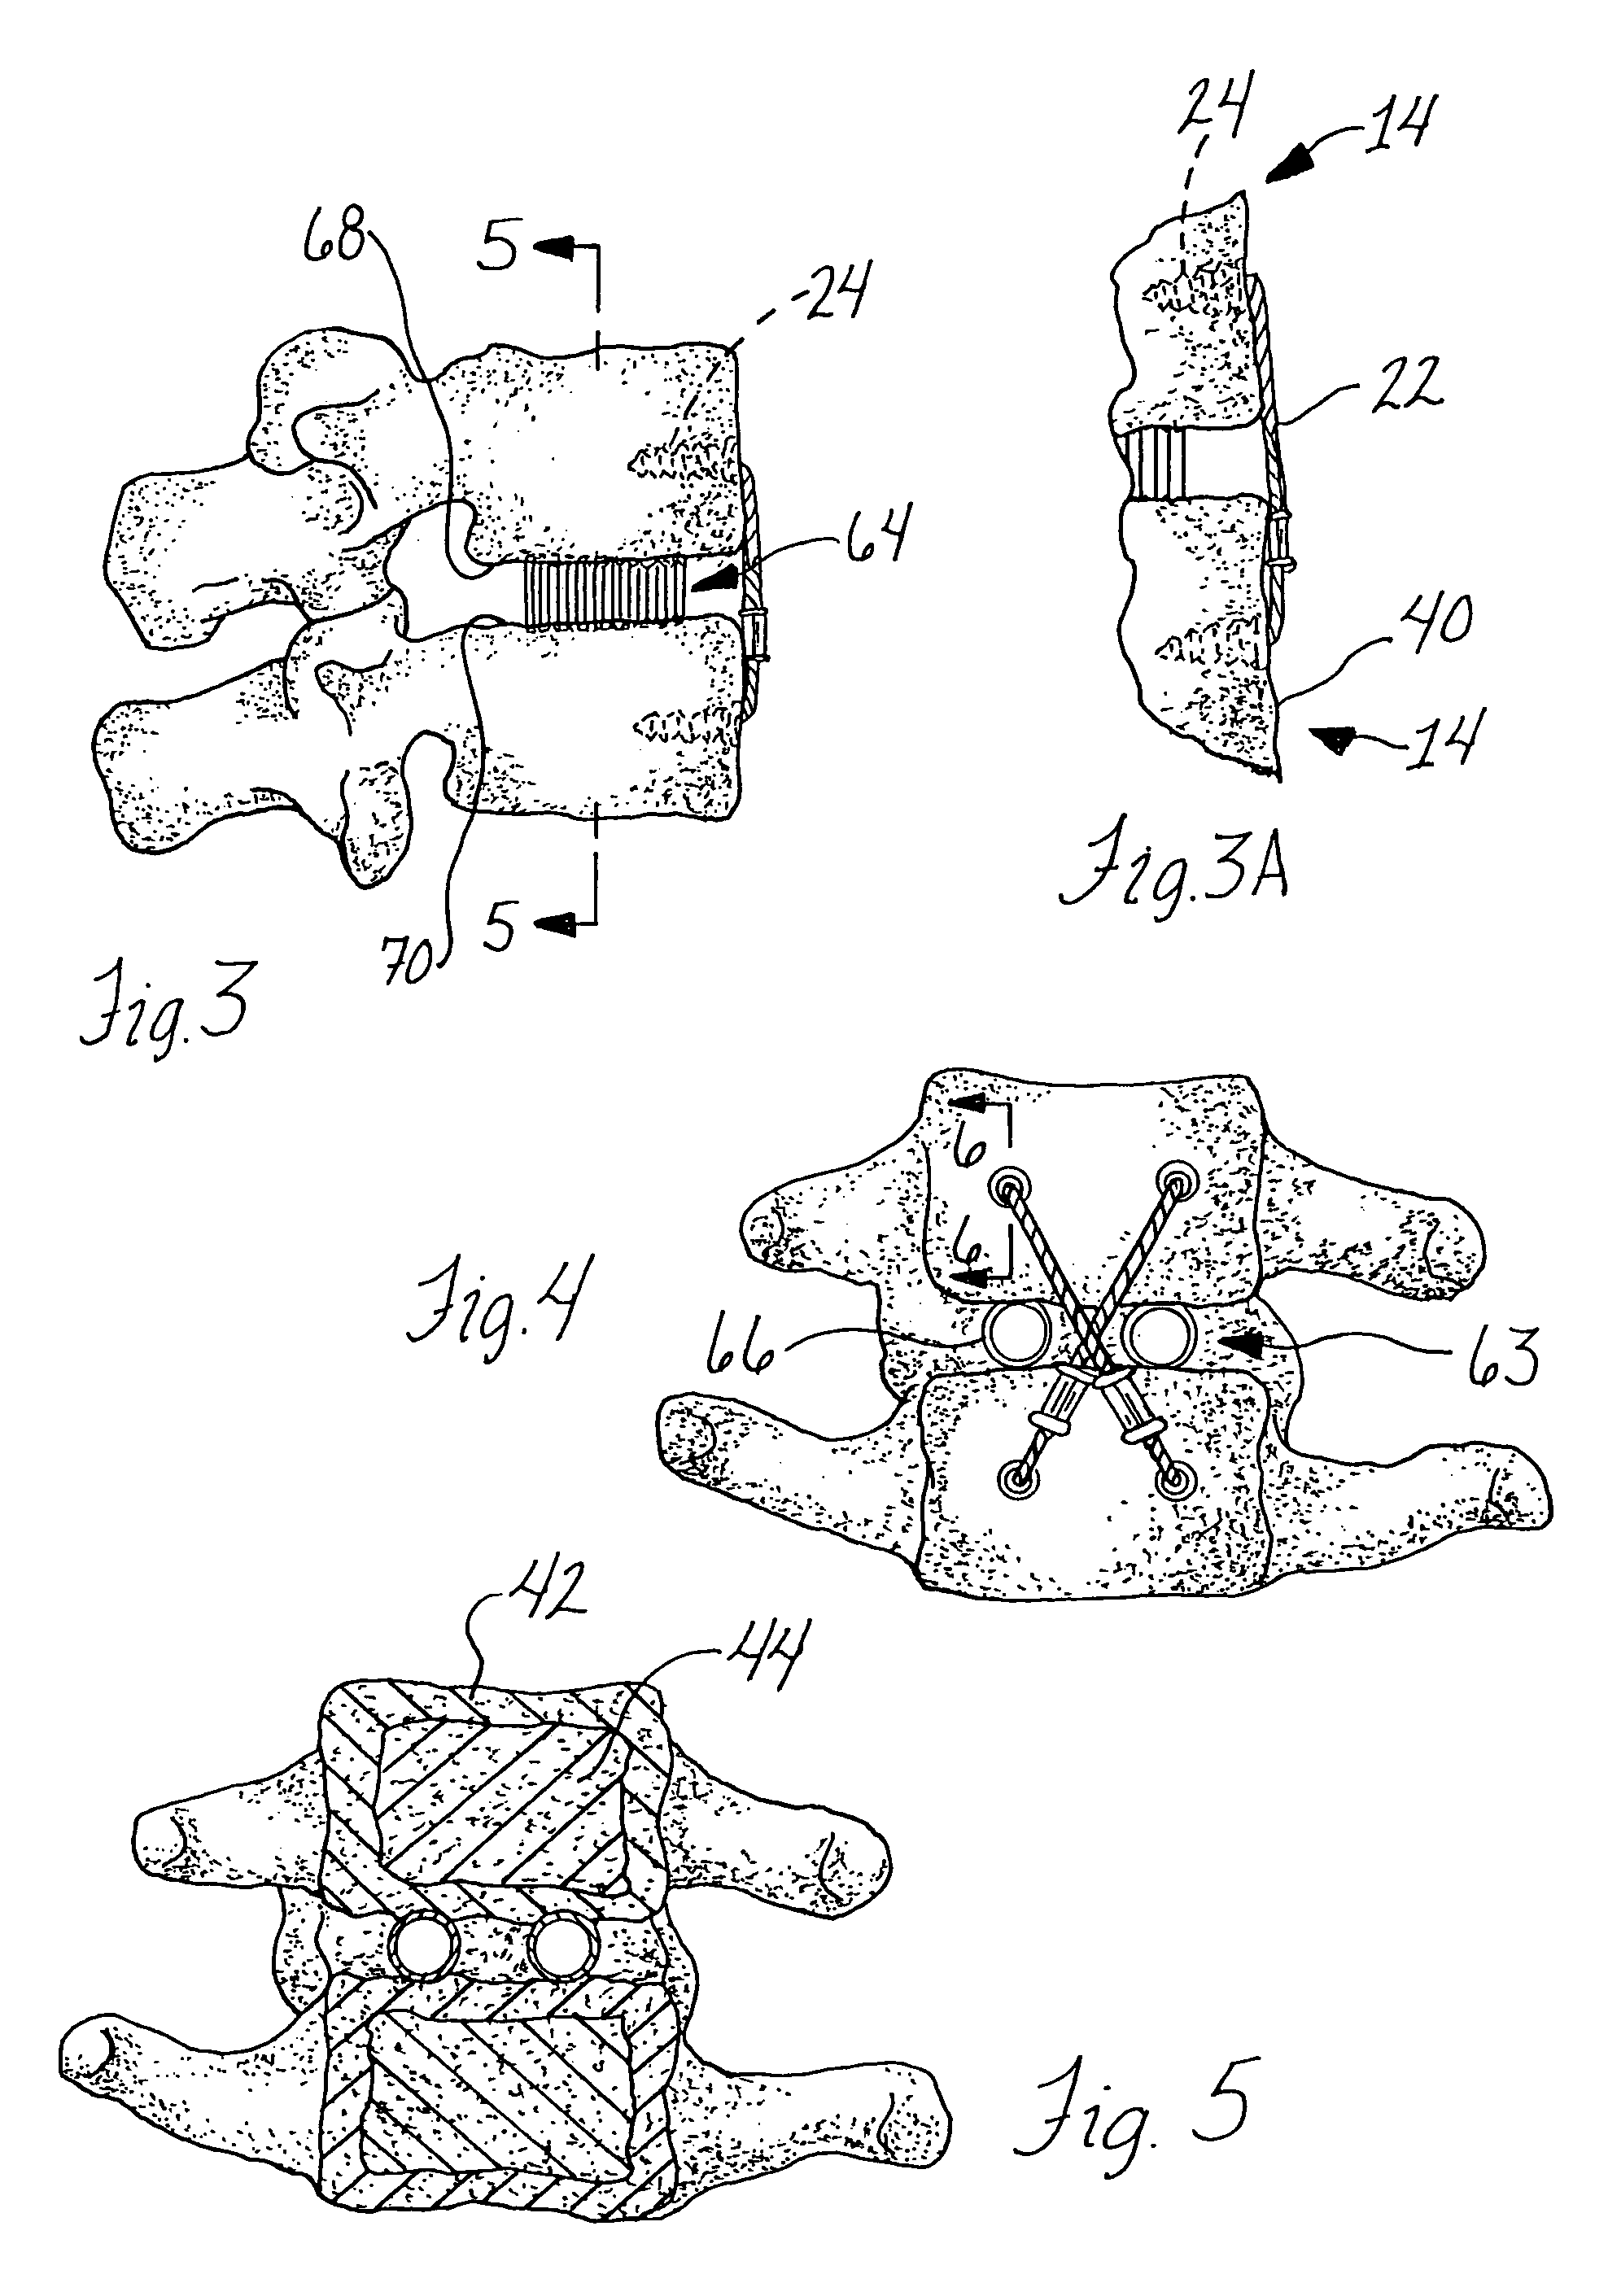 System and method for bone fixation